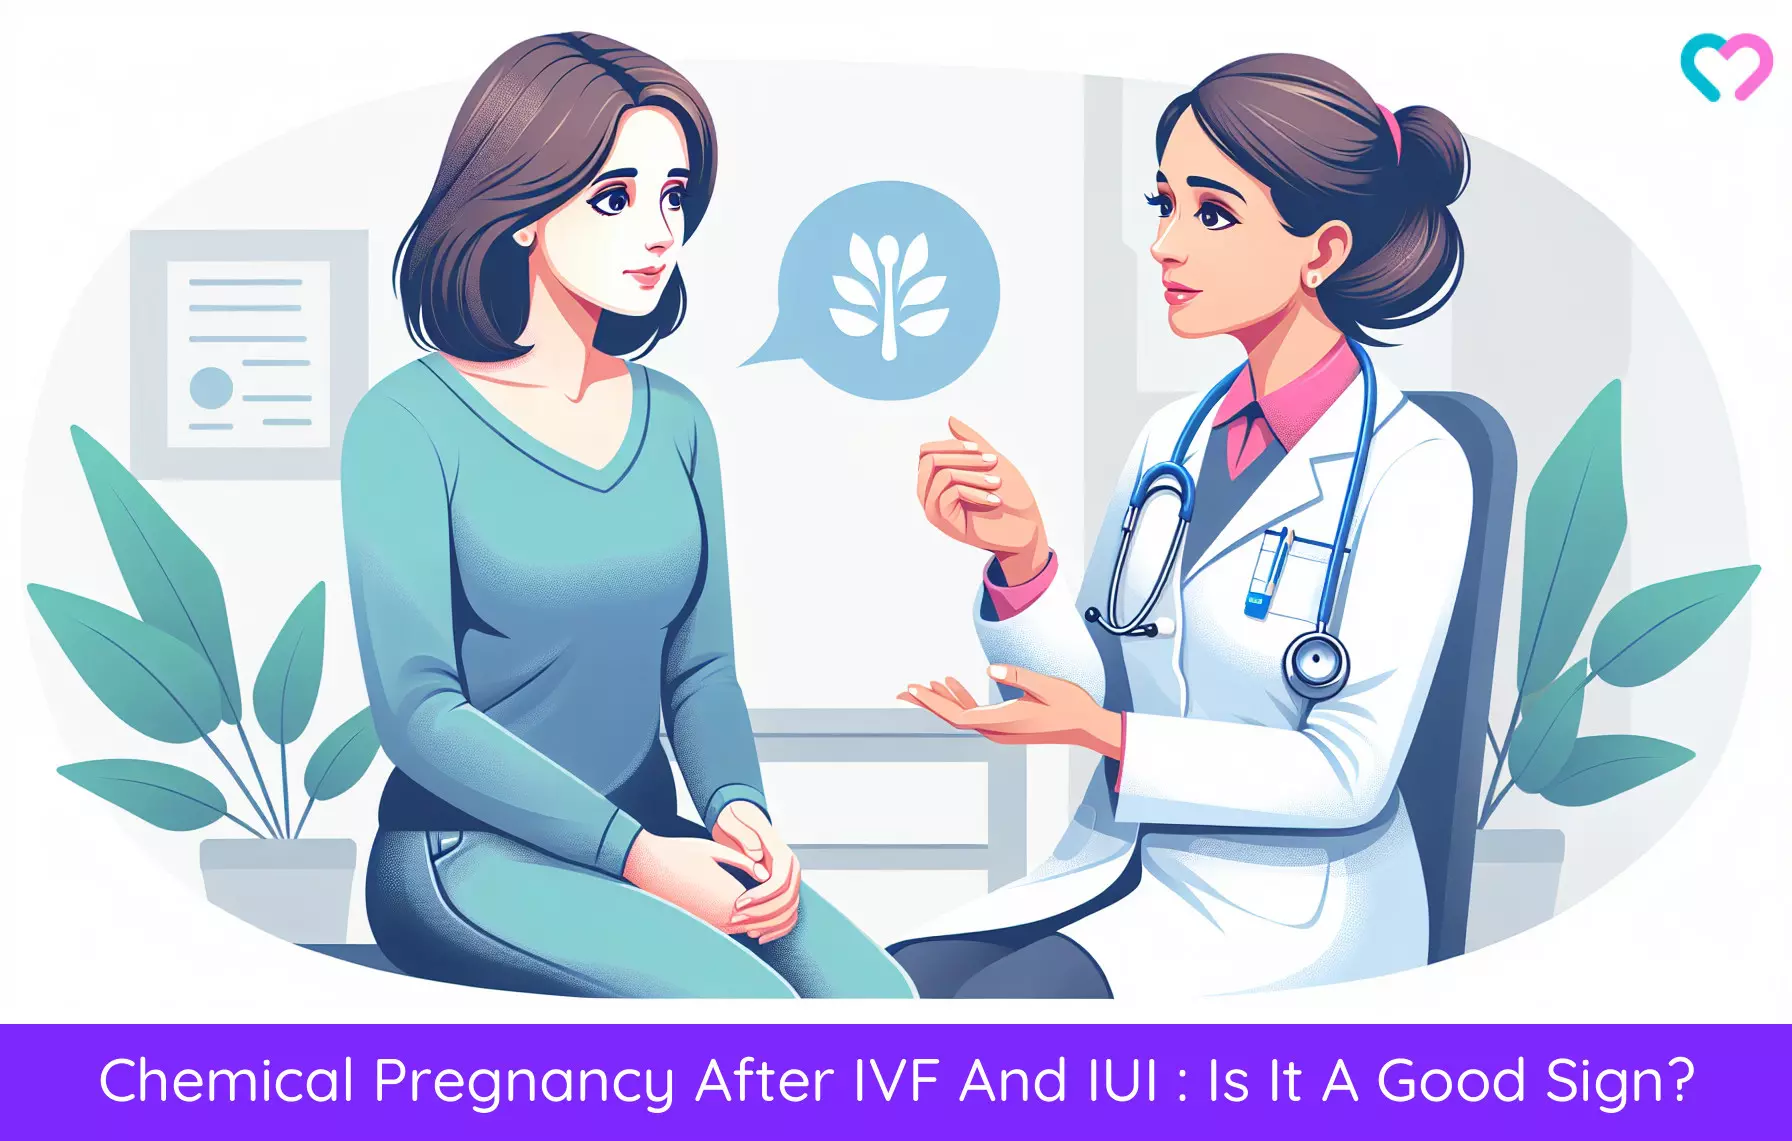 Chemical Pregnancy And IVF_illustration